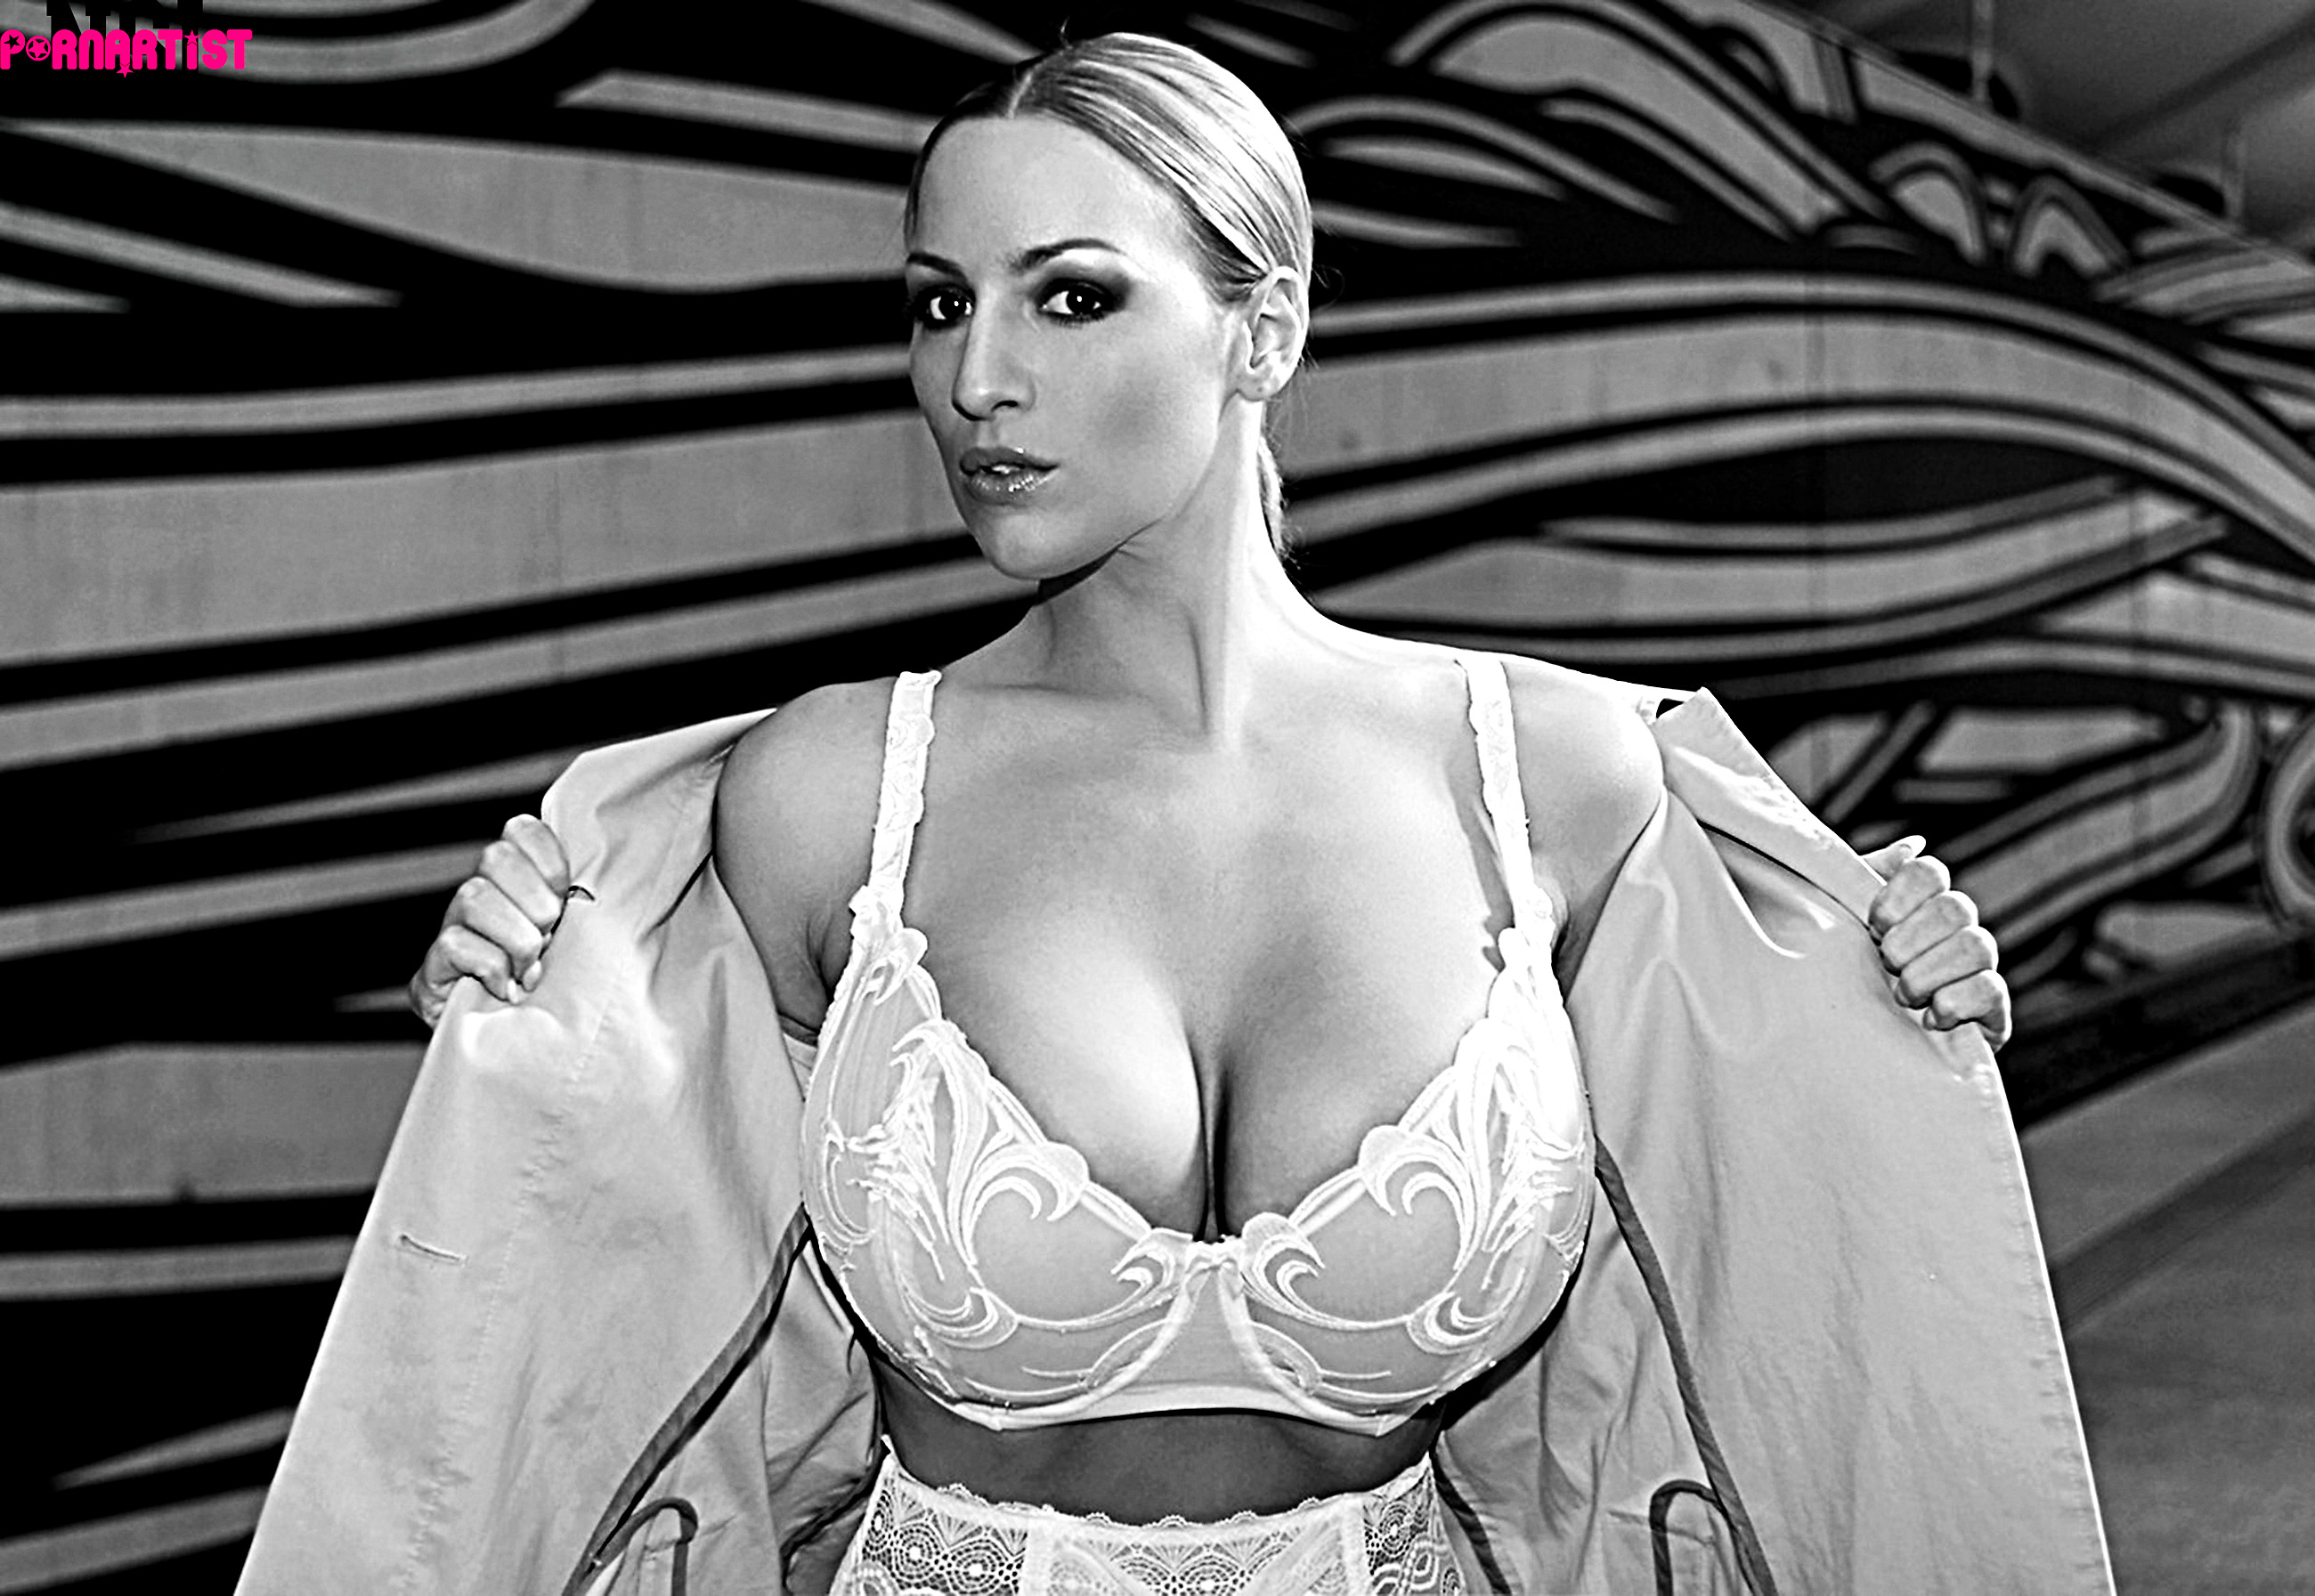 2600px x 1793px - Jordan Carver busty big tits babe showing her bra in a black and white  erotic photo wallpaper 2600x1793 nude models and pornstars wallpapers